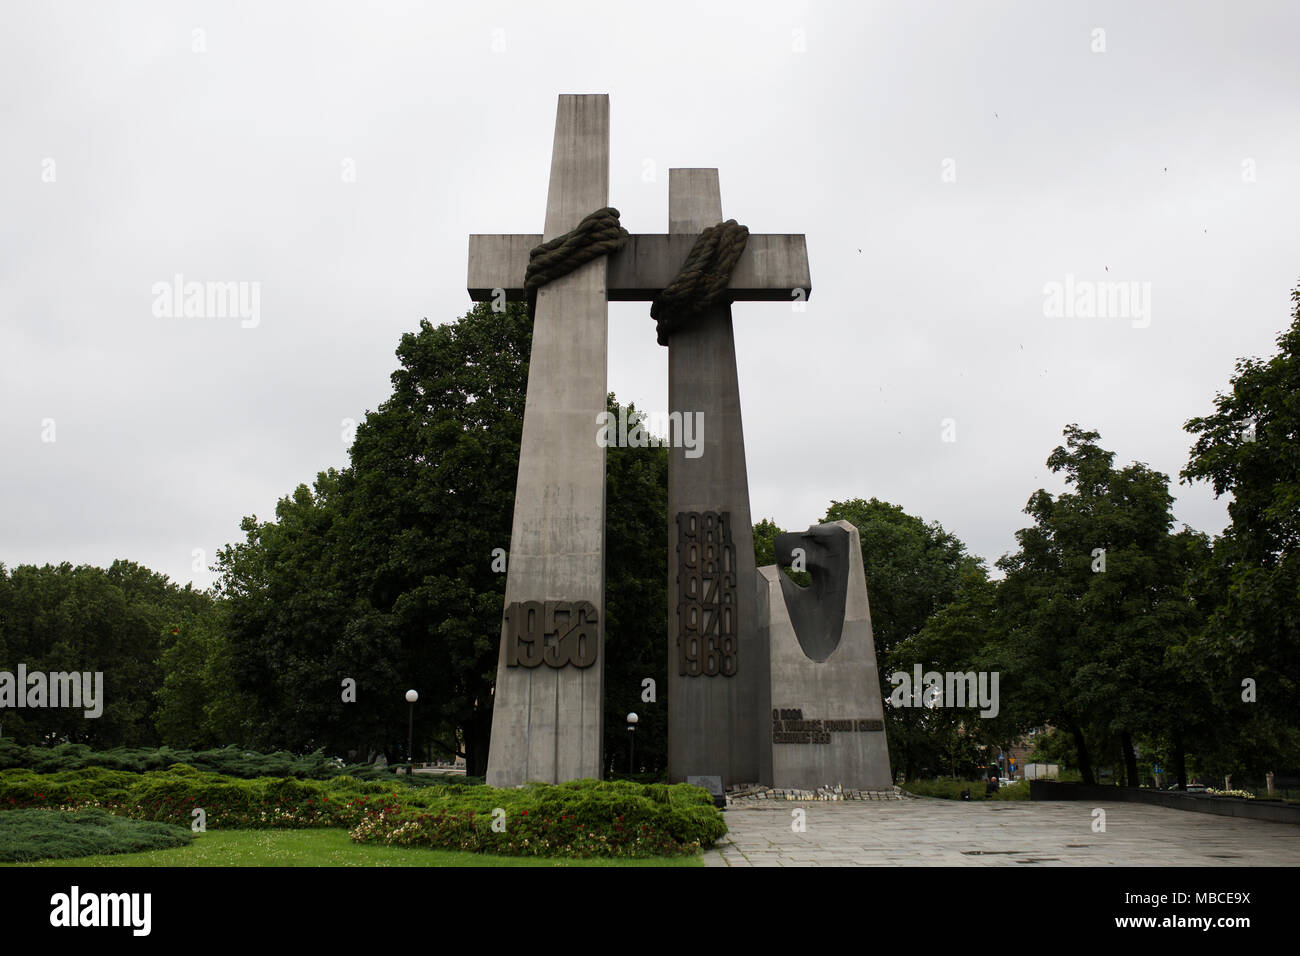 The June 1956 revolution monument in Poznan, Poland, unveiled in 1981 in honor of revolutionary riots in the city. Stock Photo